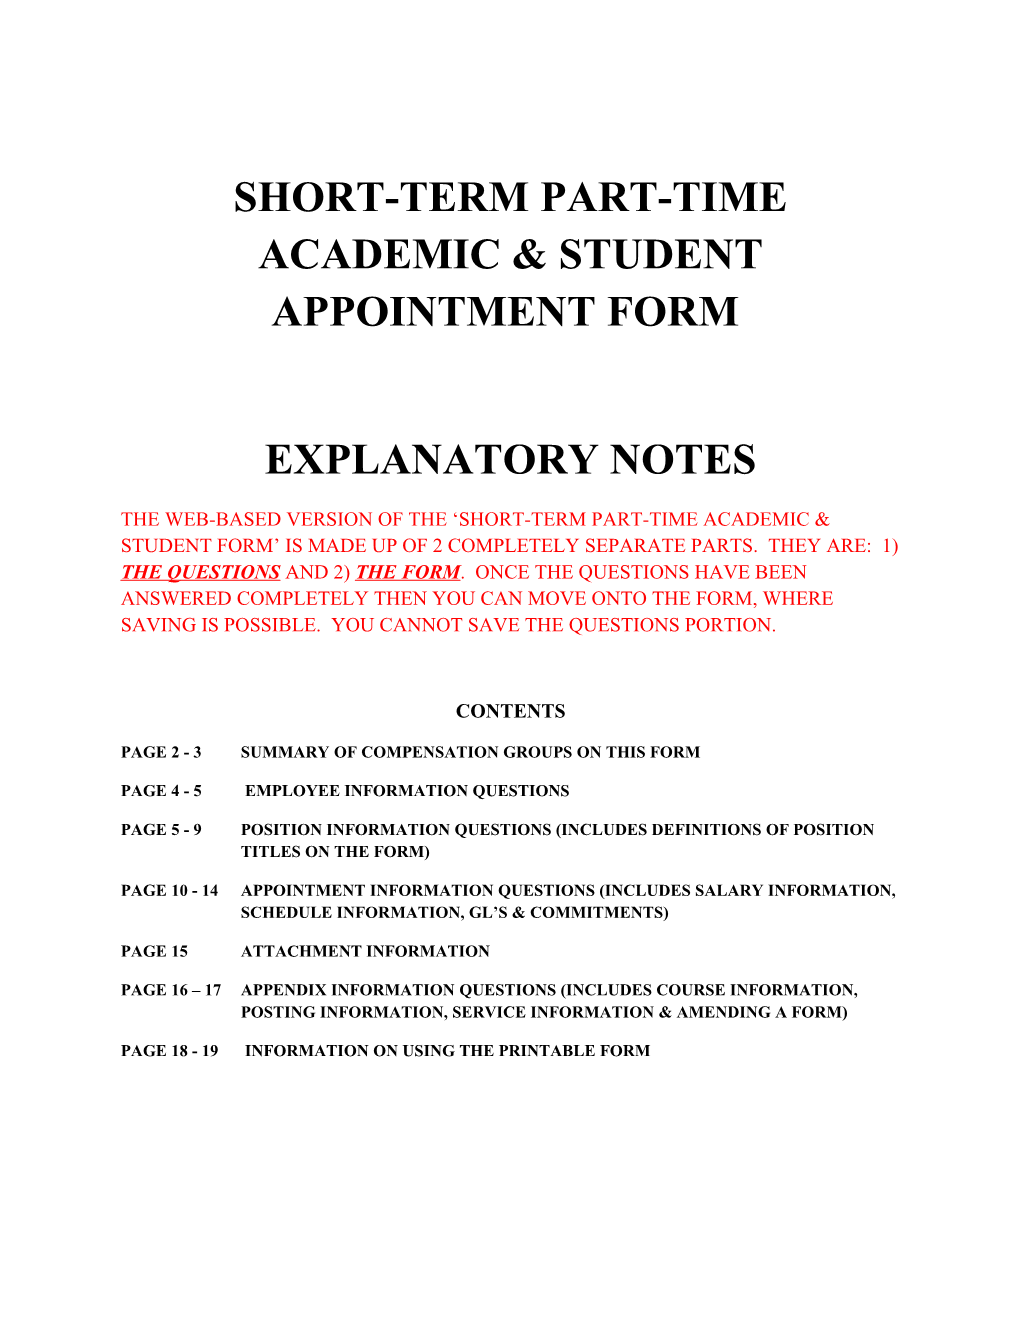 Short-Term Part-Time Academic & Student Appointment Form